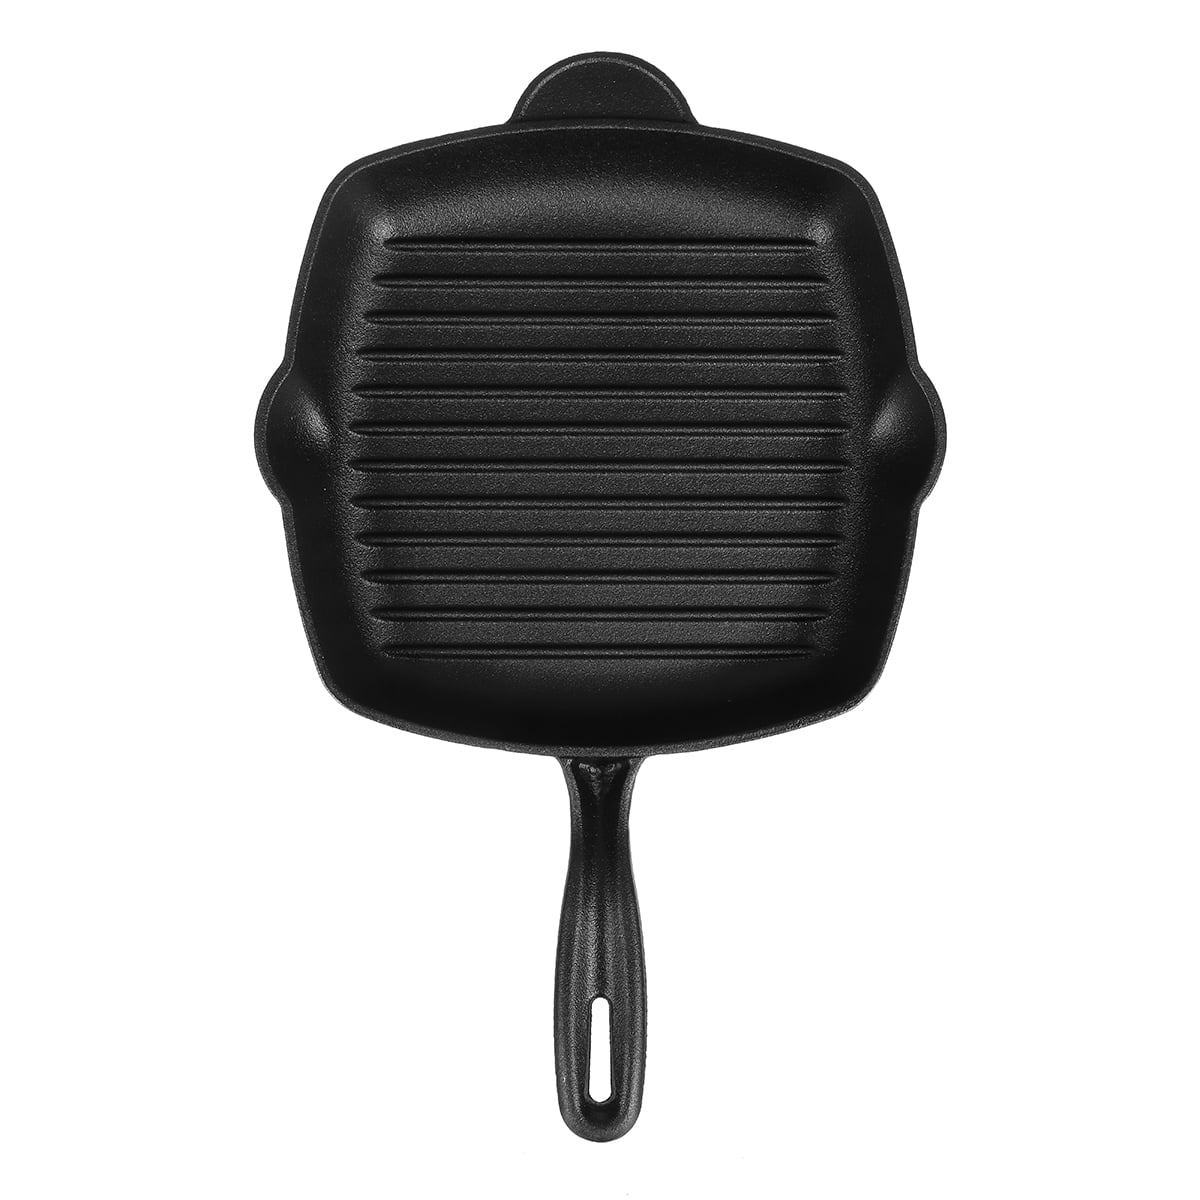 Cast Iron Grill Pan Large 9 Square Stovetop/Induction In/outdoor  Invitations